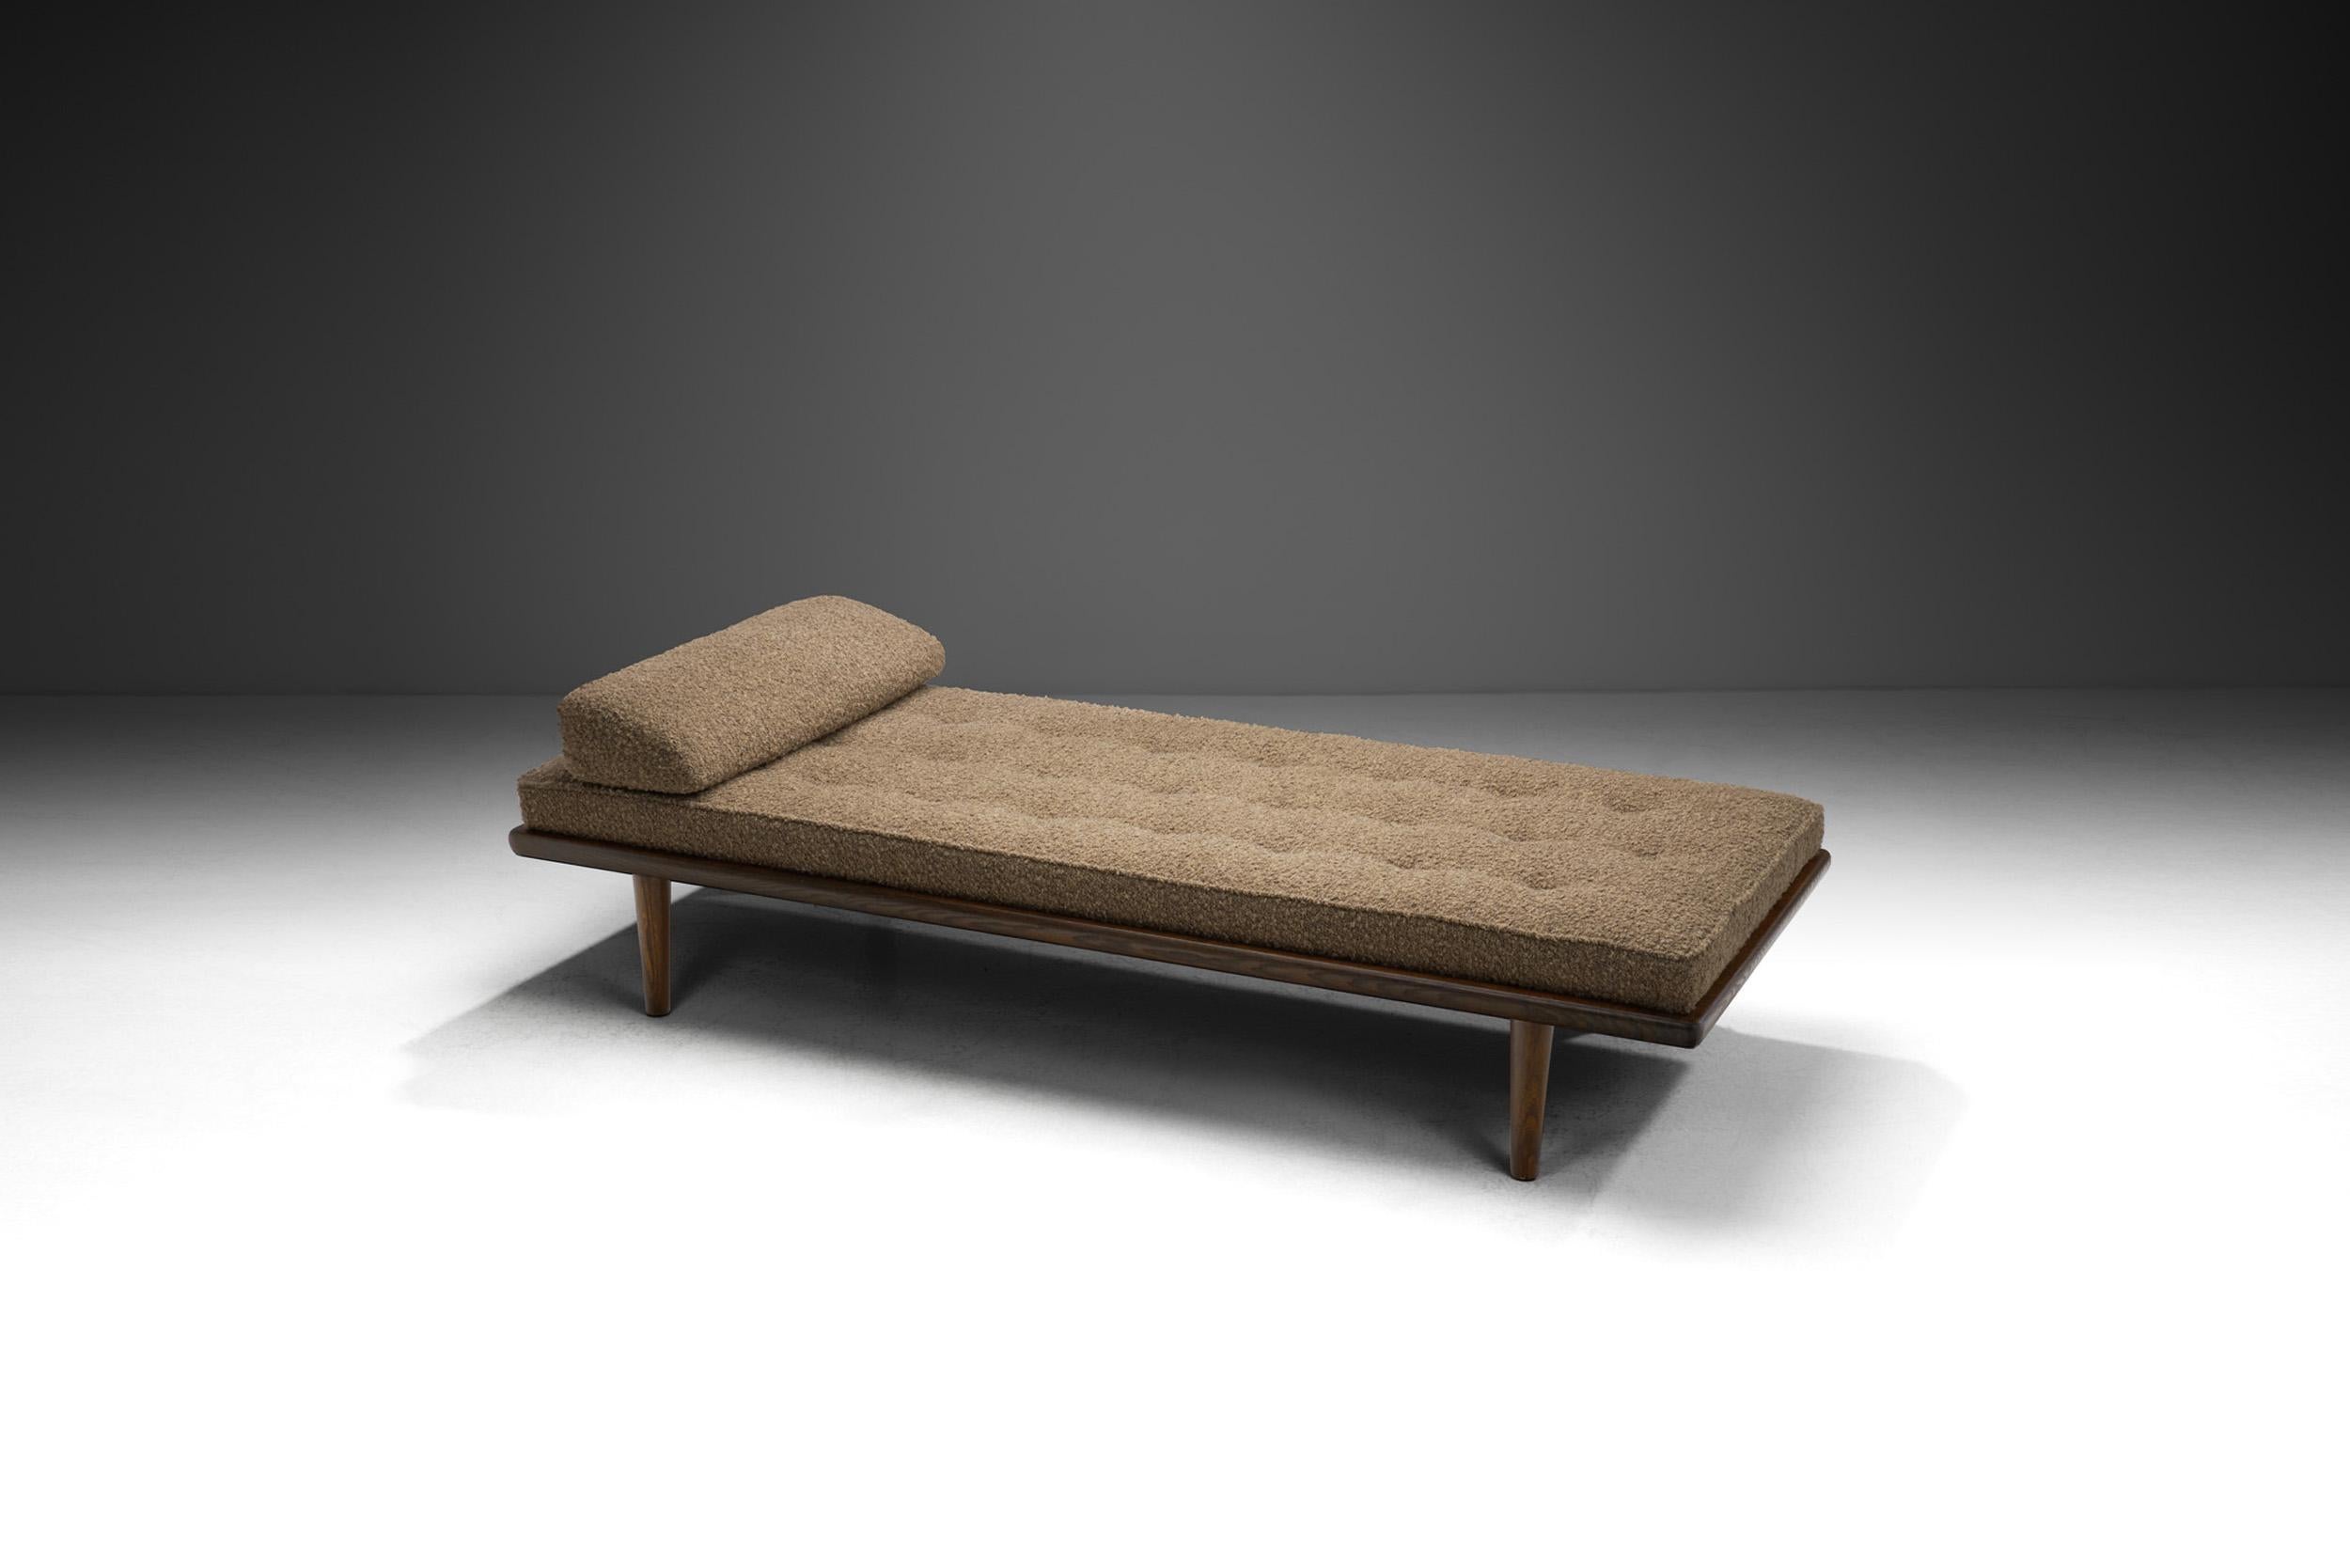 Like in most European countries, the desire for functionalism went hand in hand with understatement, refinement, and elegance for much of the mid-century era in Sweden. This gorgeous daybed was inspired by the classic Swedish furniture design ideals